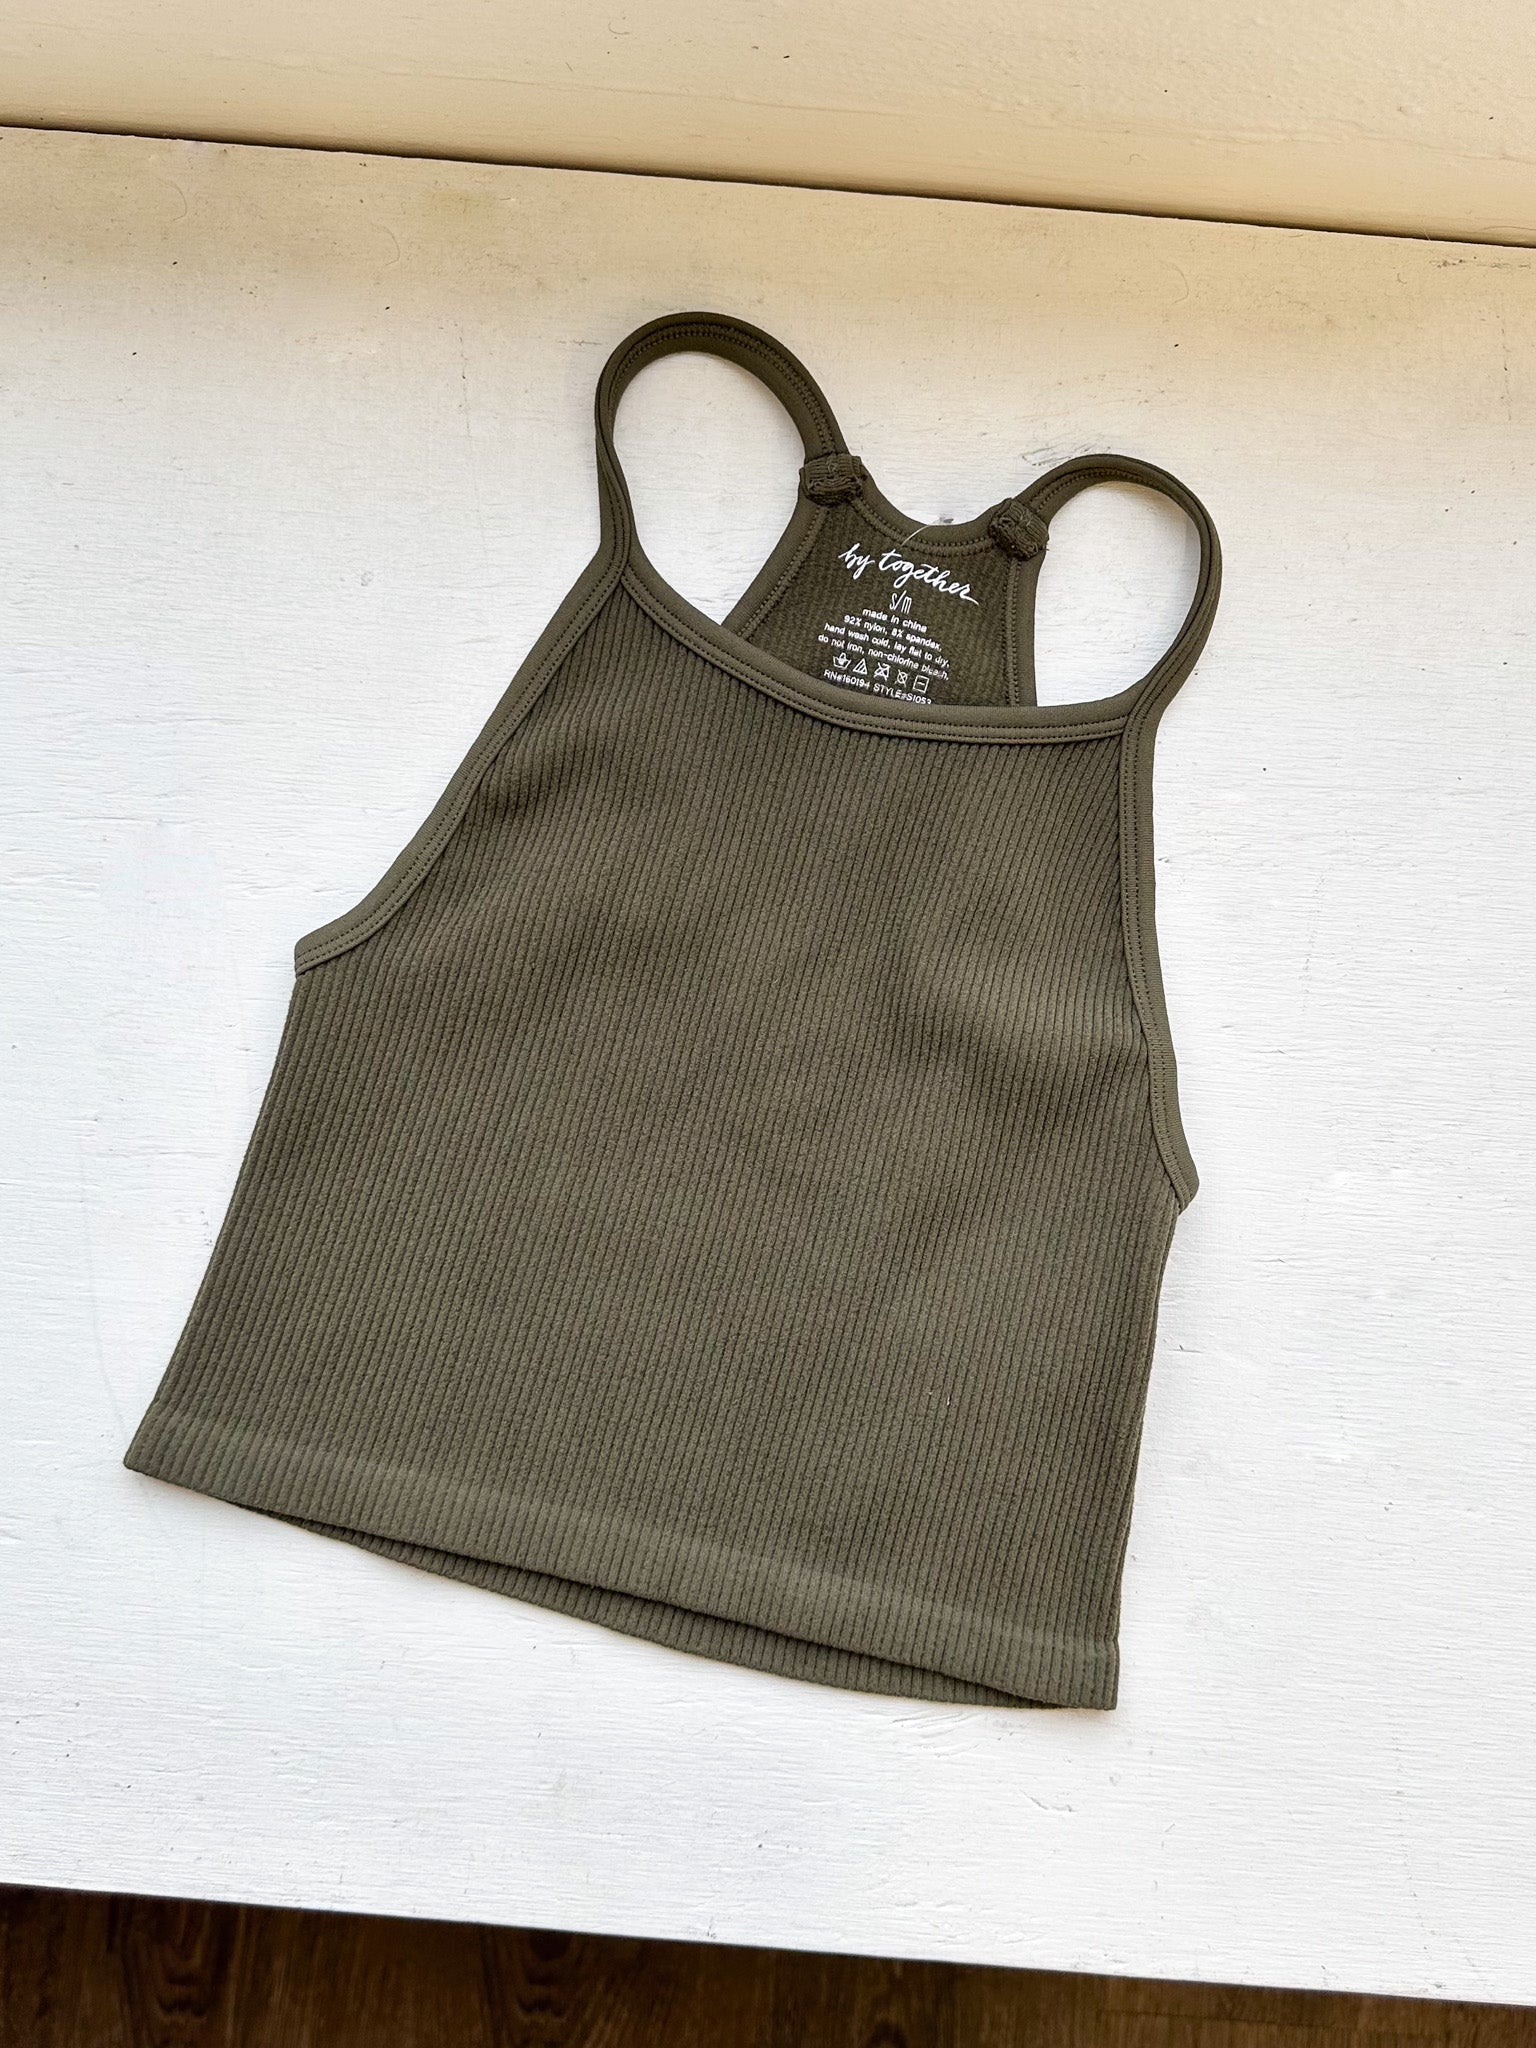 Knock Out Seamless Halter Top